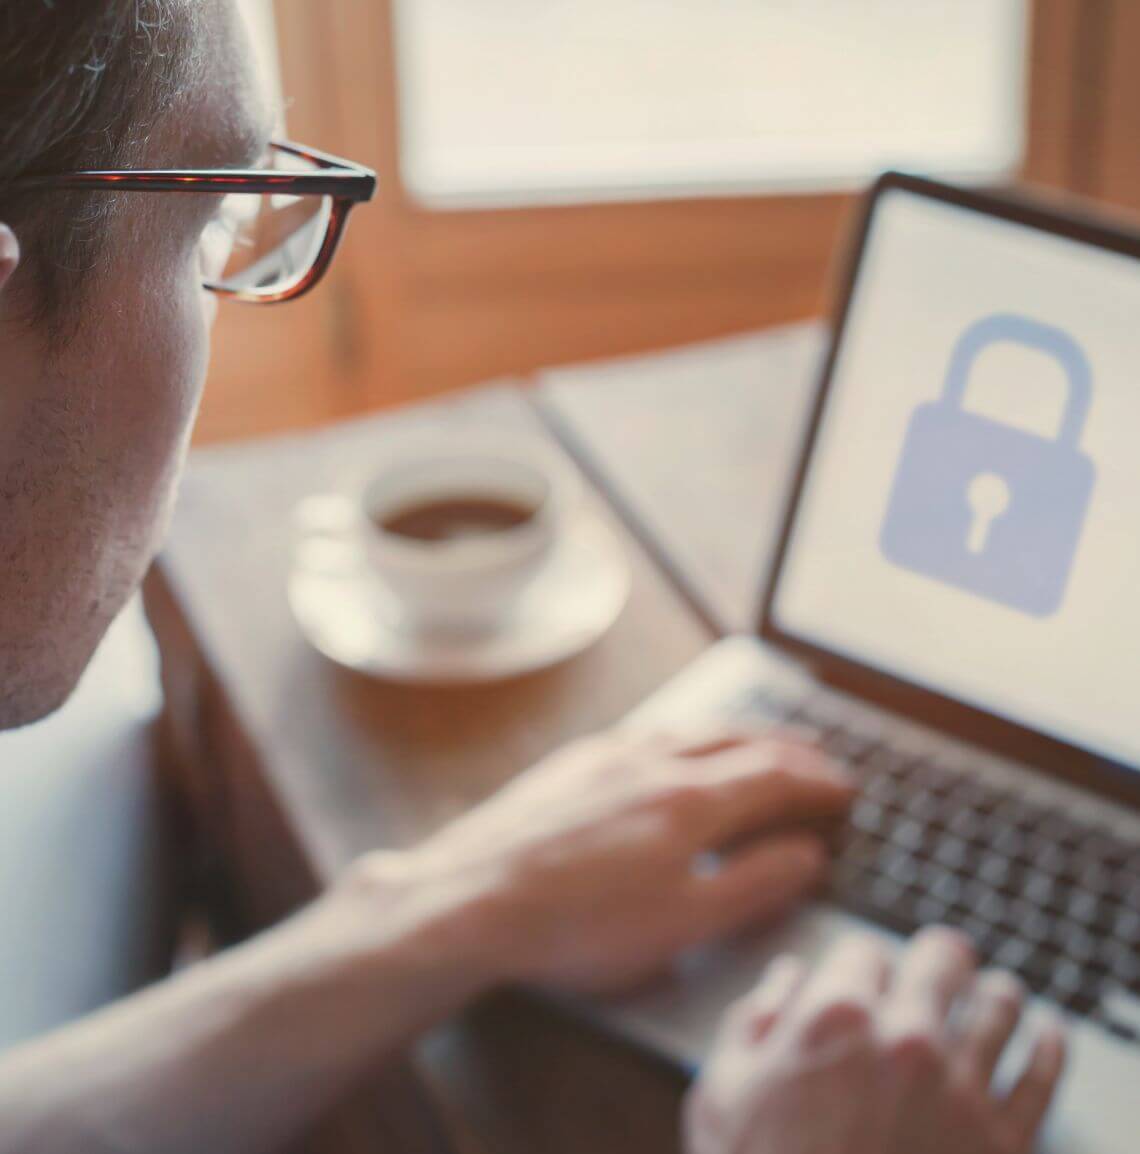 Man having coffee working on a laptop with a padlock on the screen